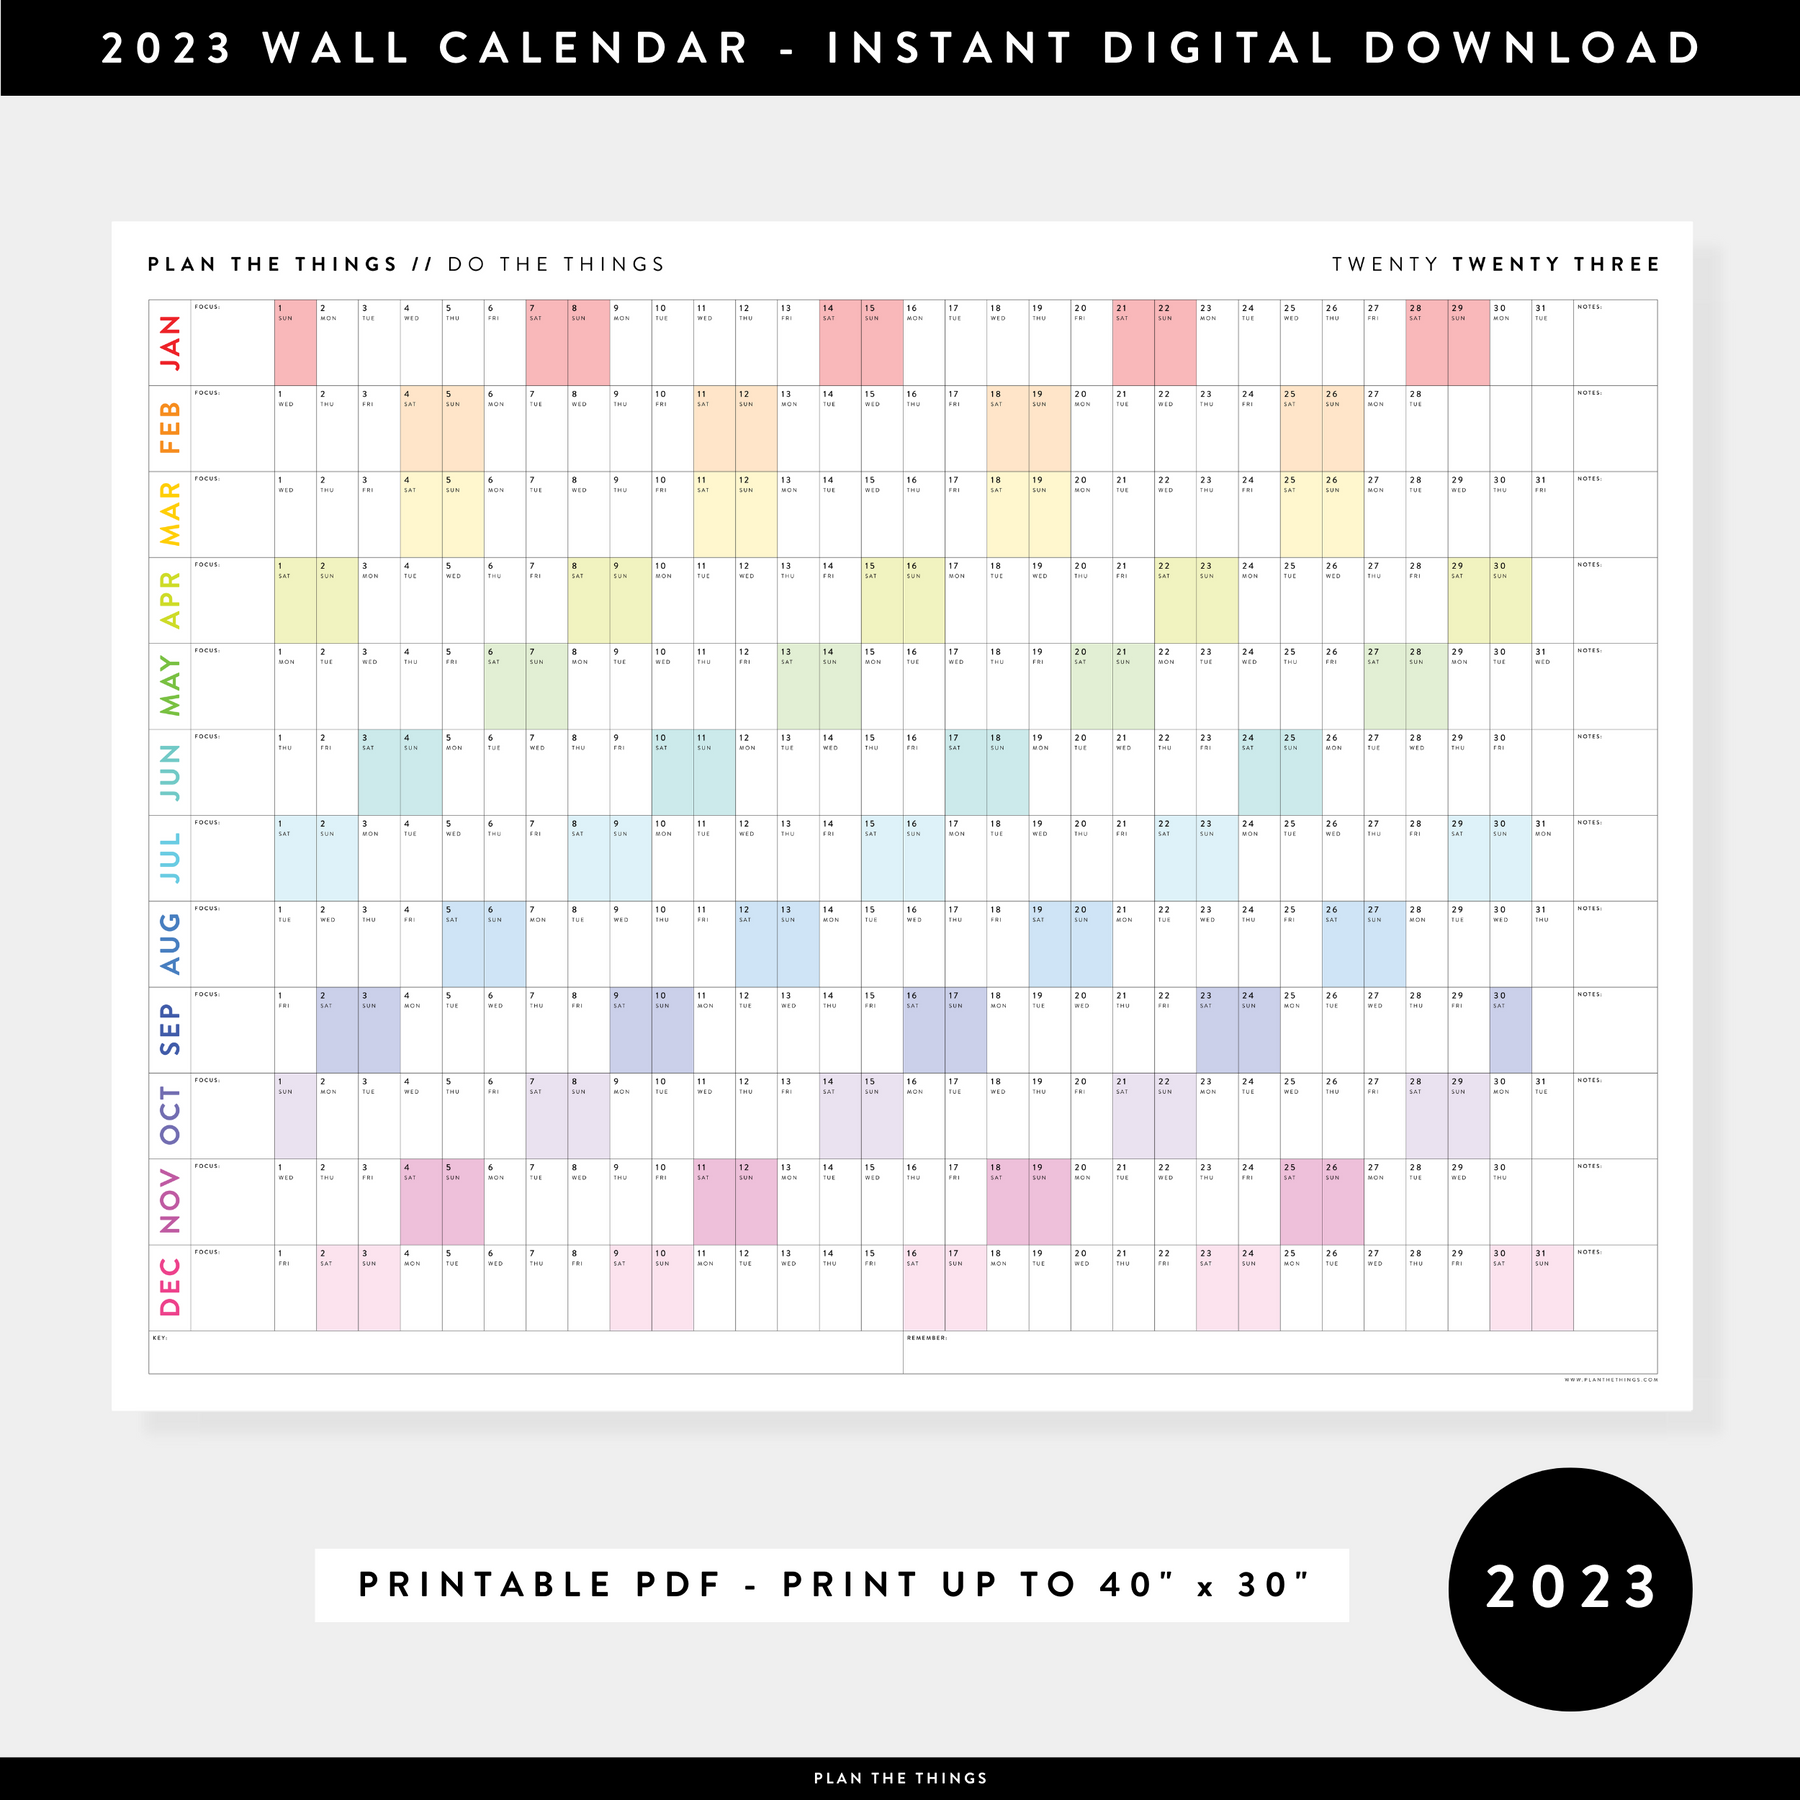 PRINTABLE 2023 ANNUAL CALENDARS // INSTANT DOWNLOAD - Plan The Things